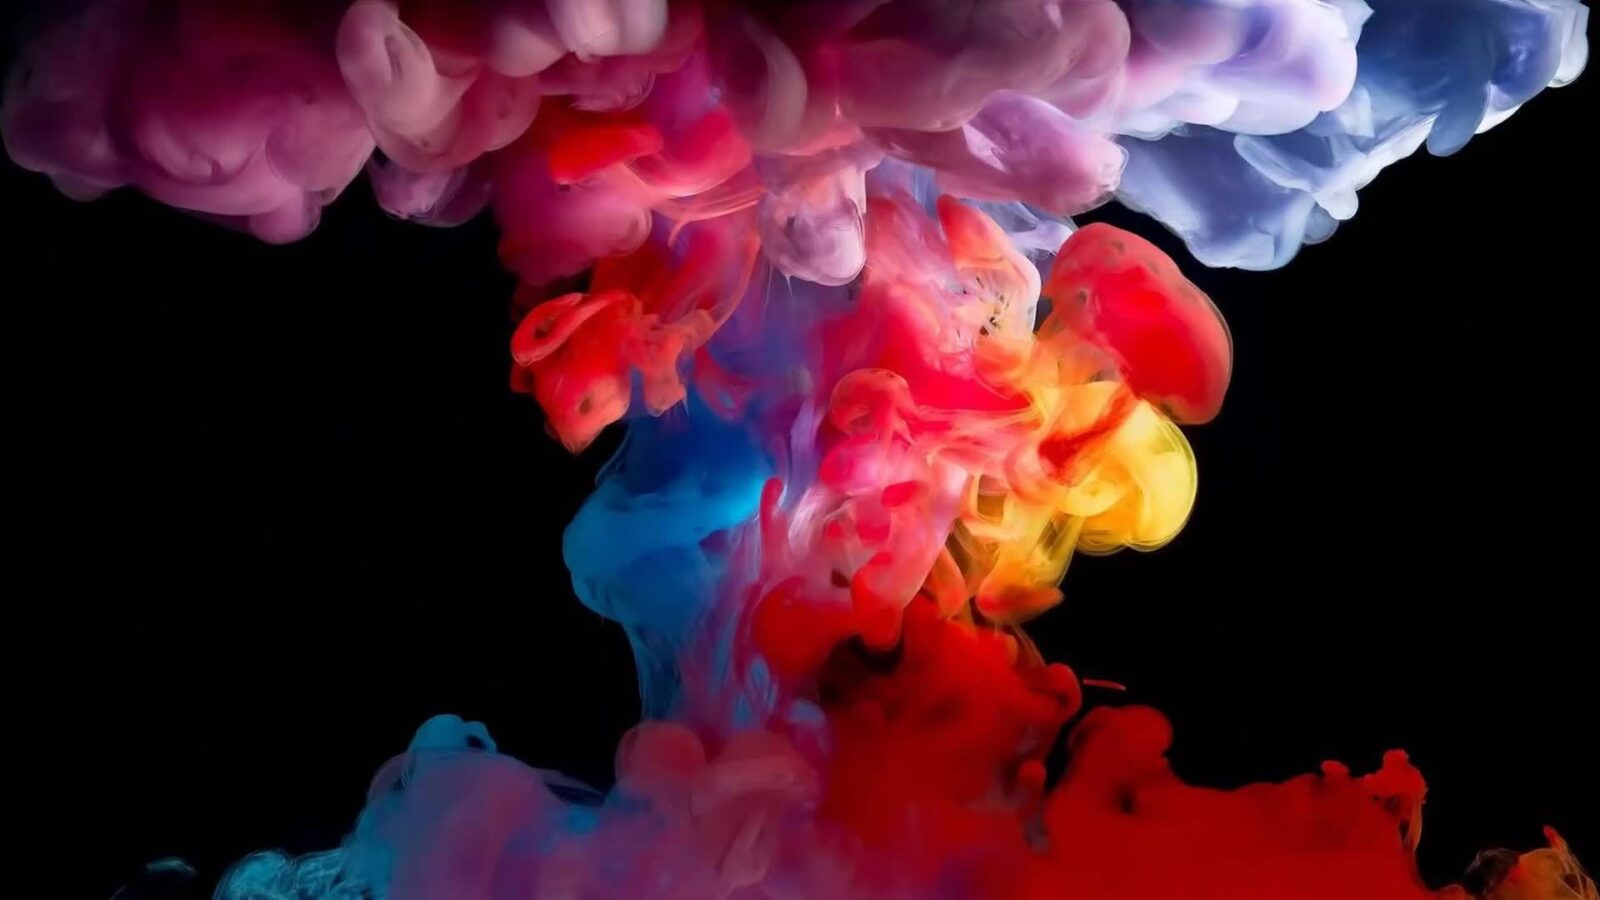 LiveWallpapers4Free.com | Artistic Colorful Abstract Smoke - Free Live Wallpaper